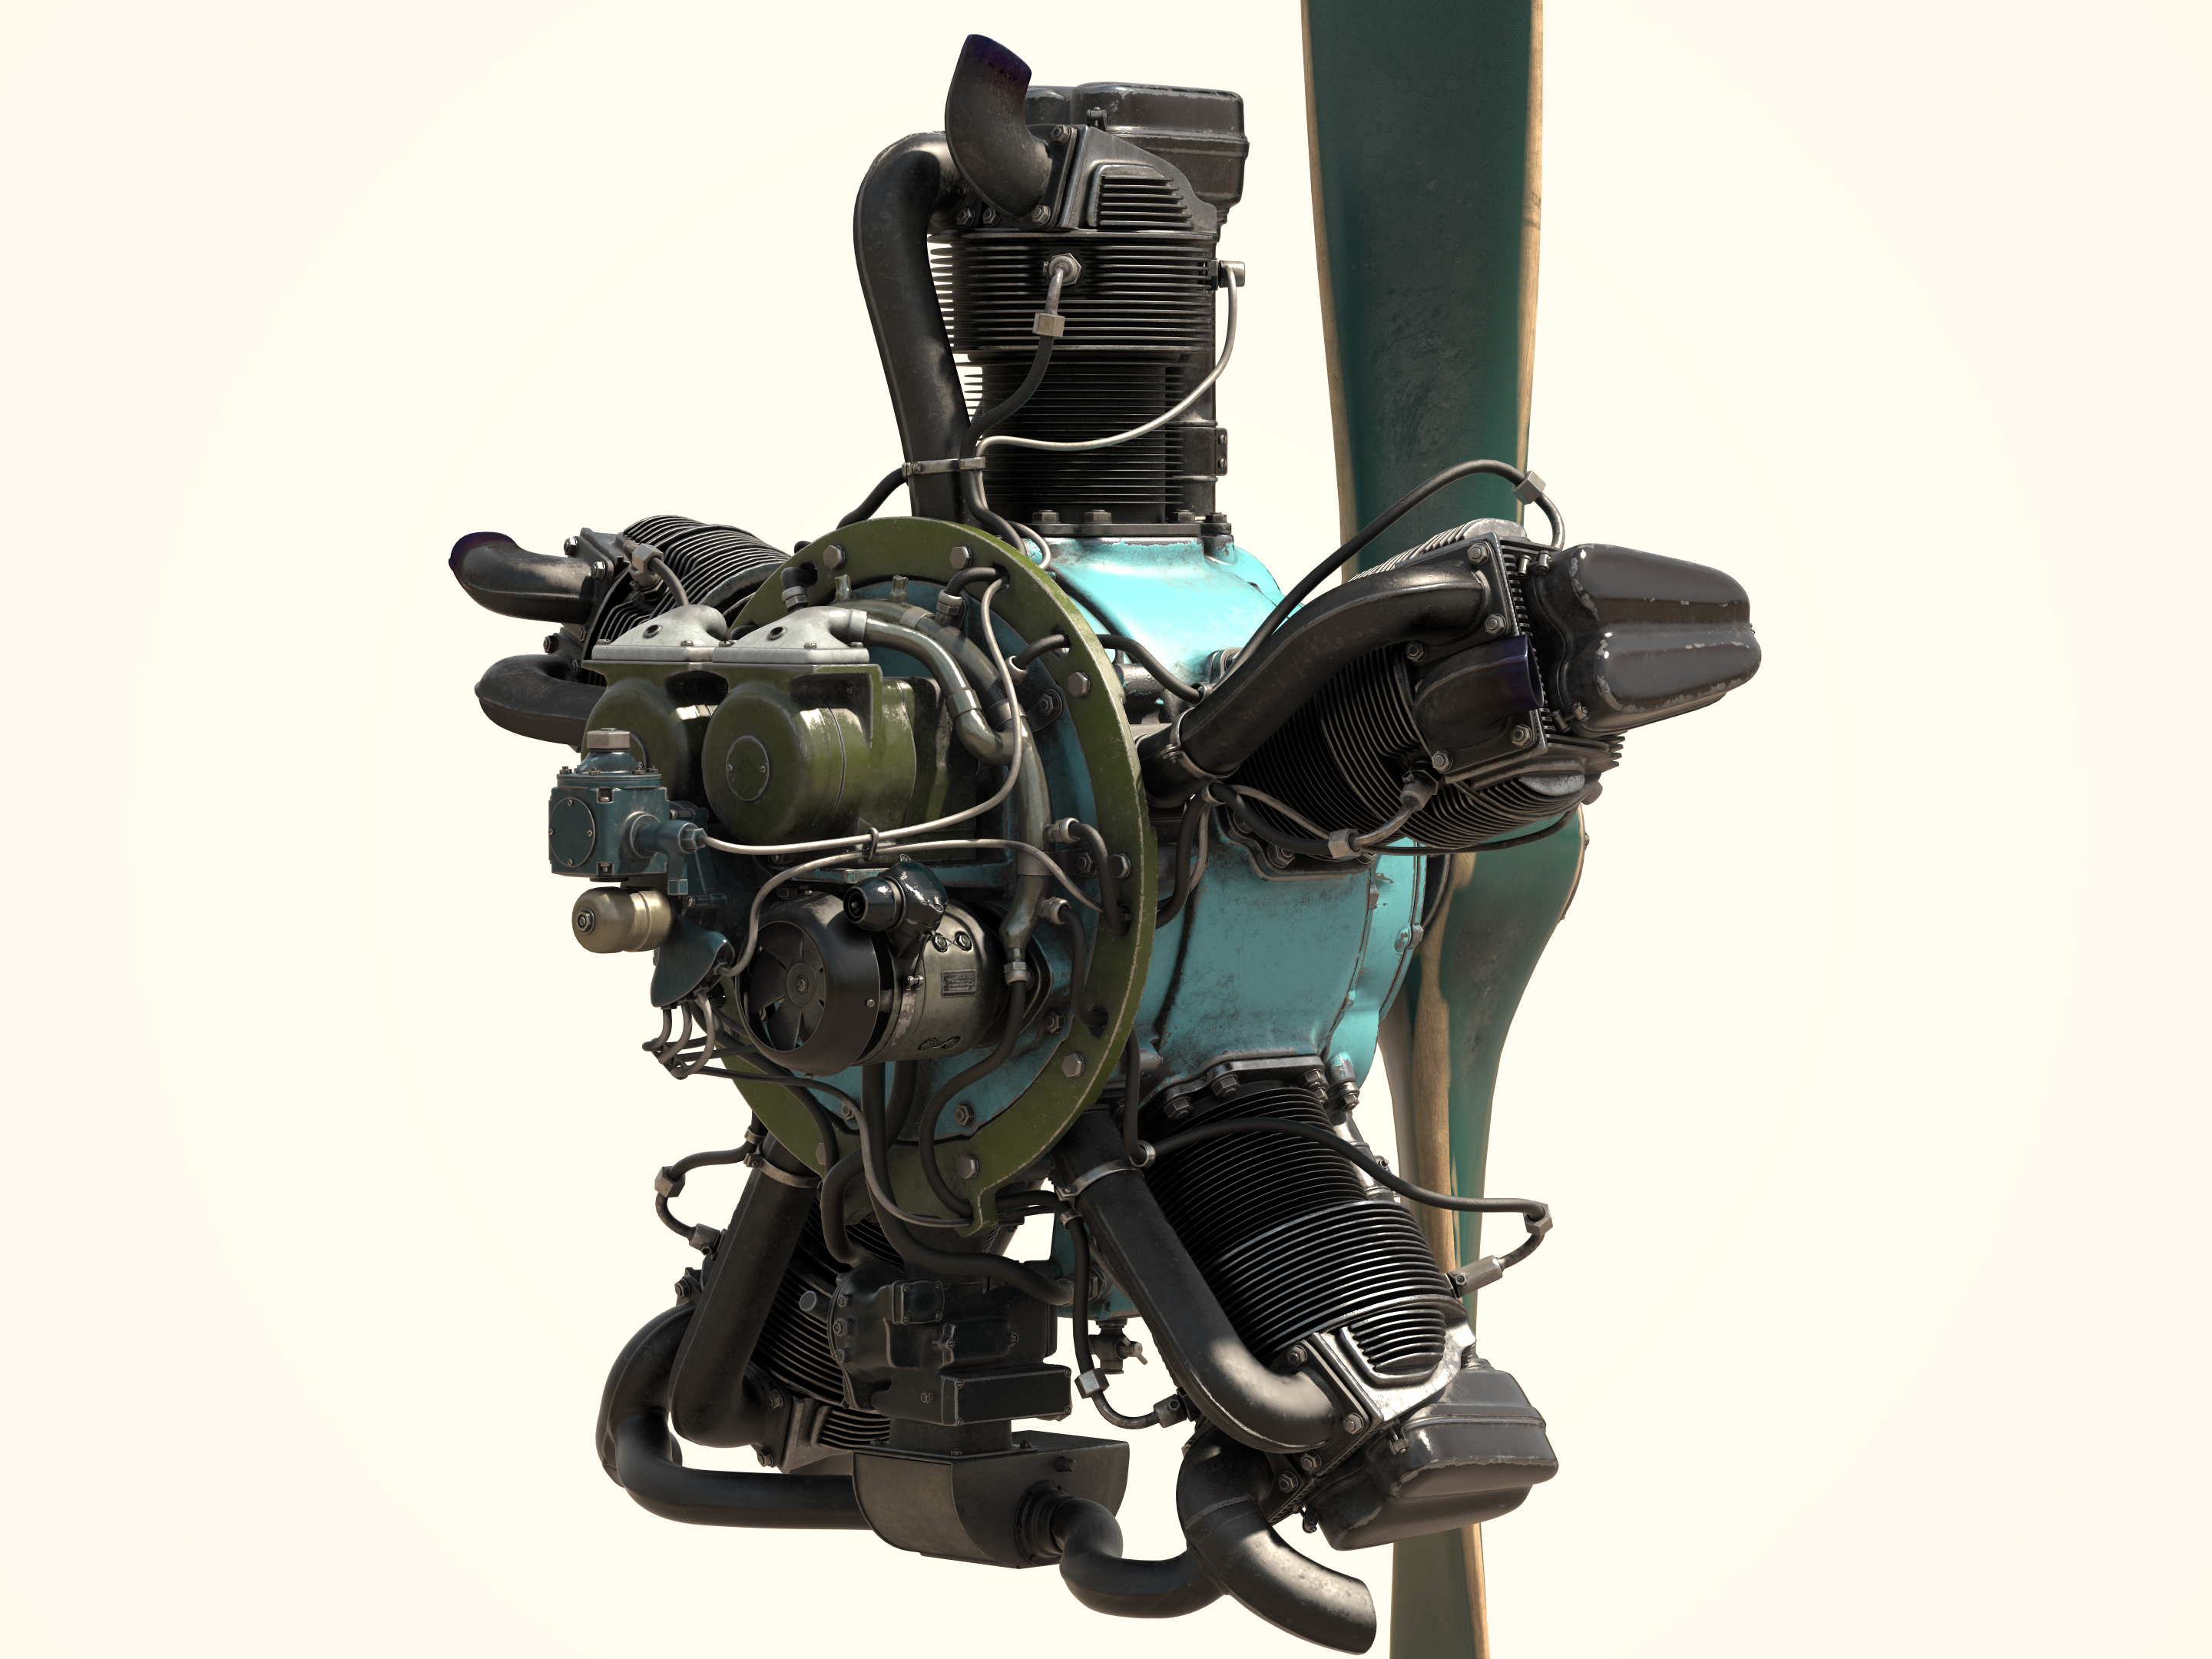 Aircraft engine M-11 3D model in 3d max vray 2.5 image